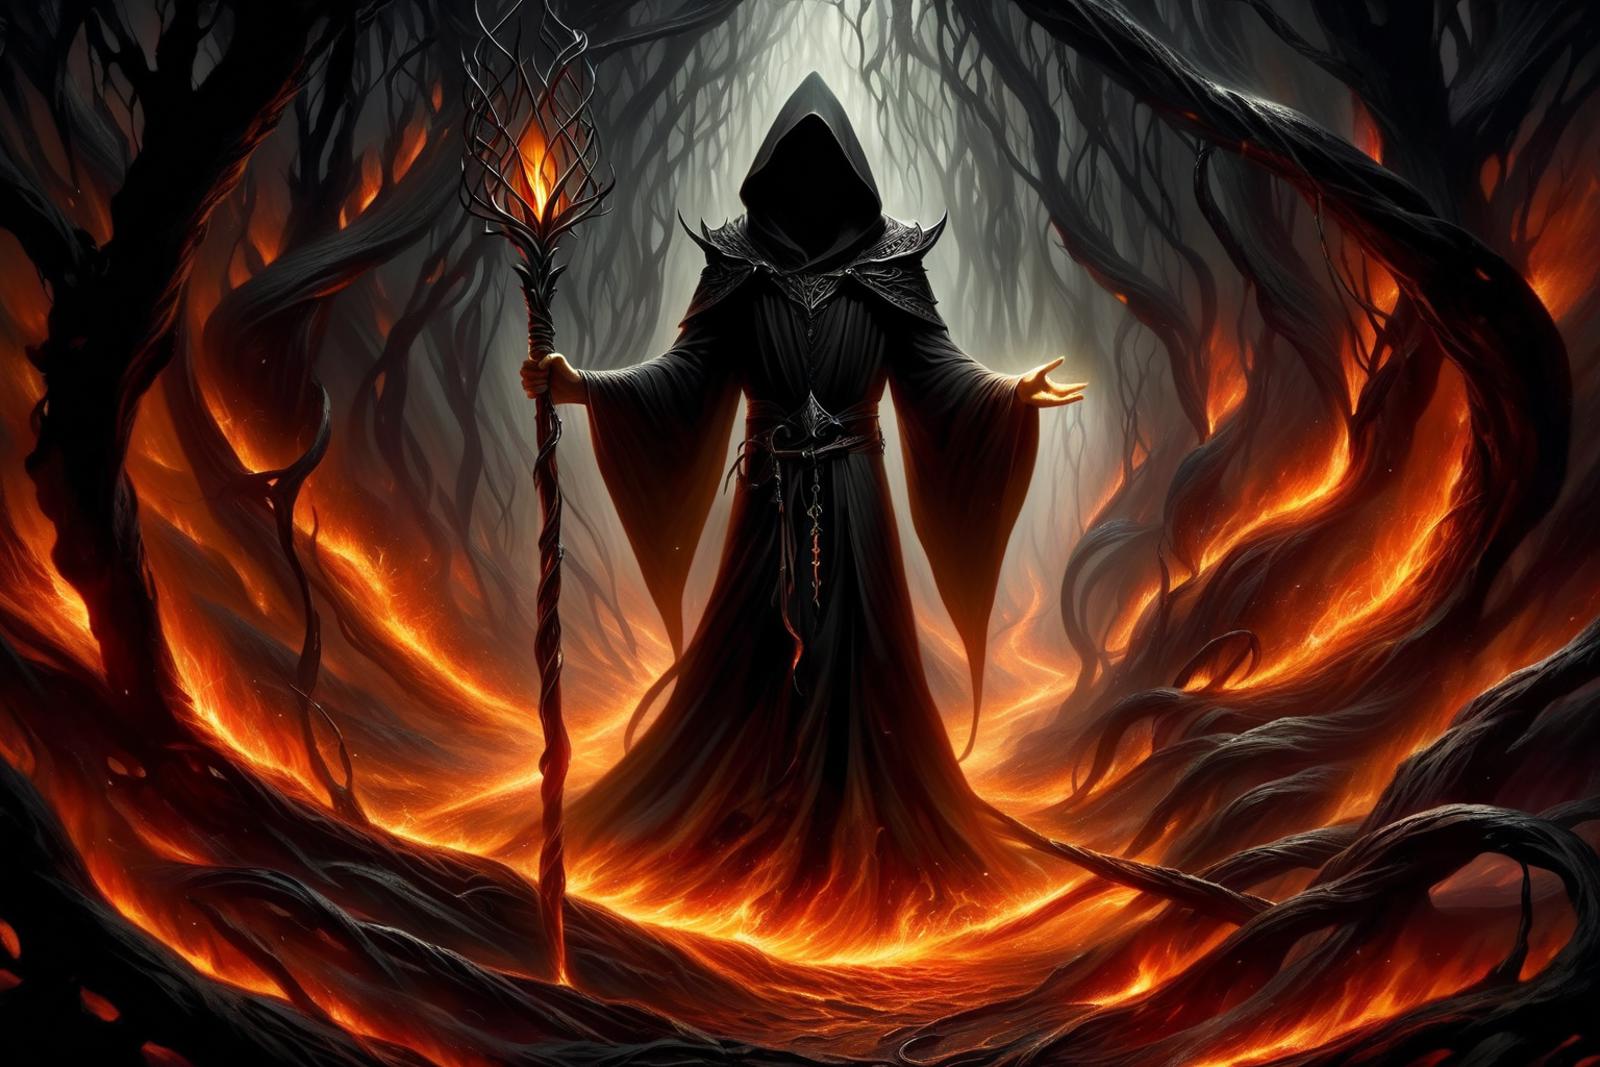 A Wizard with a staff standing on a fiery surface.